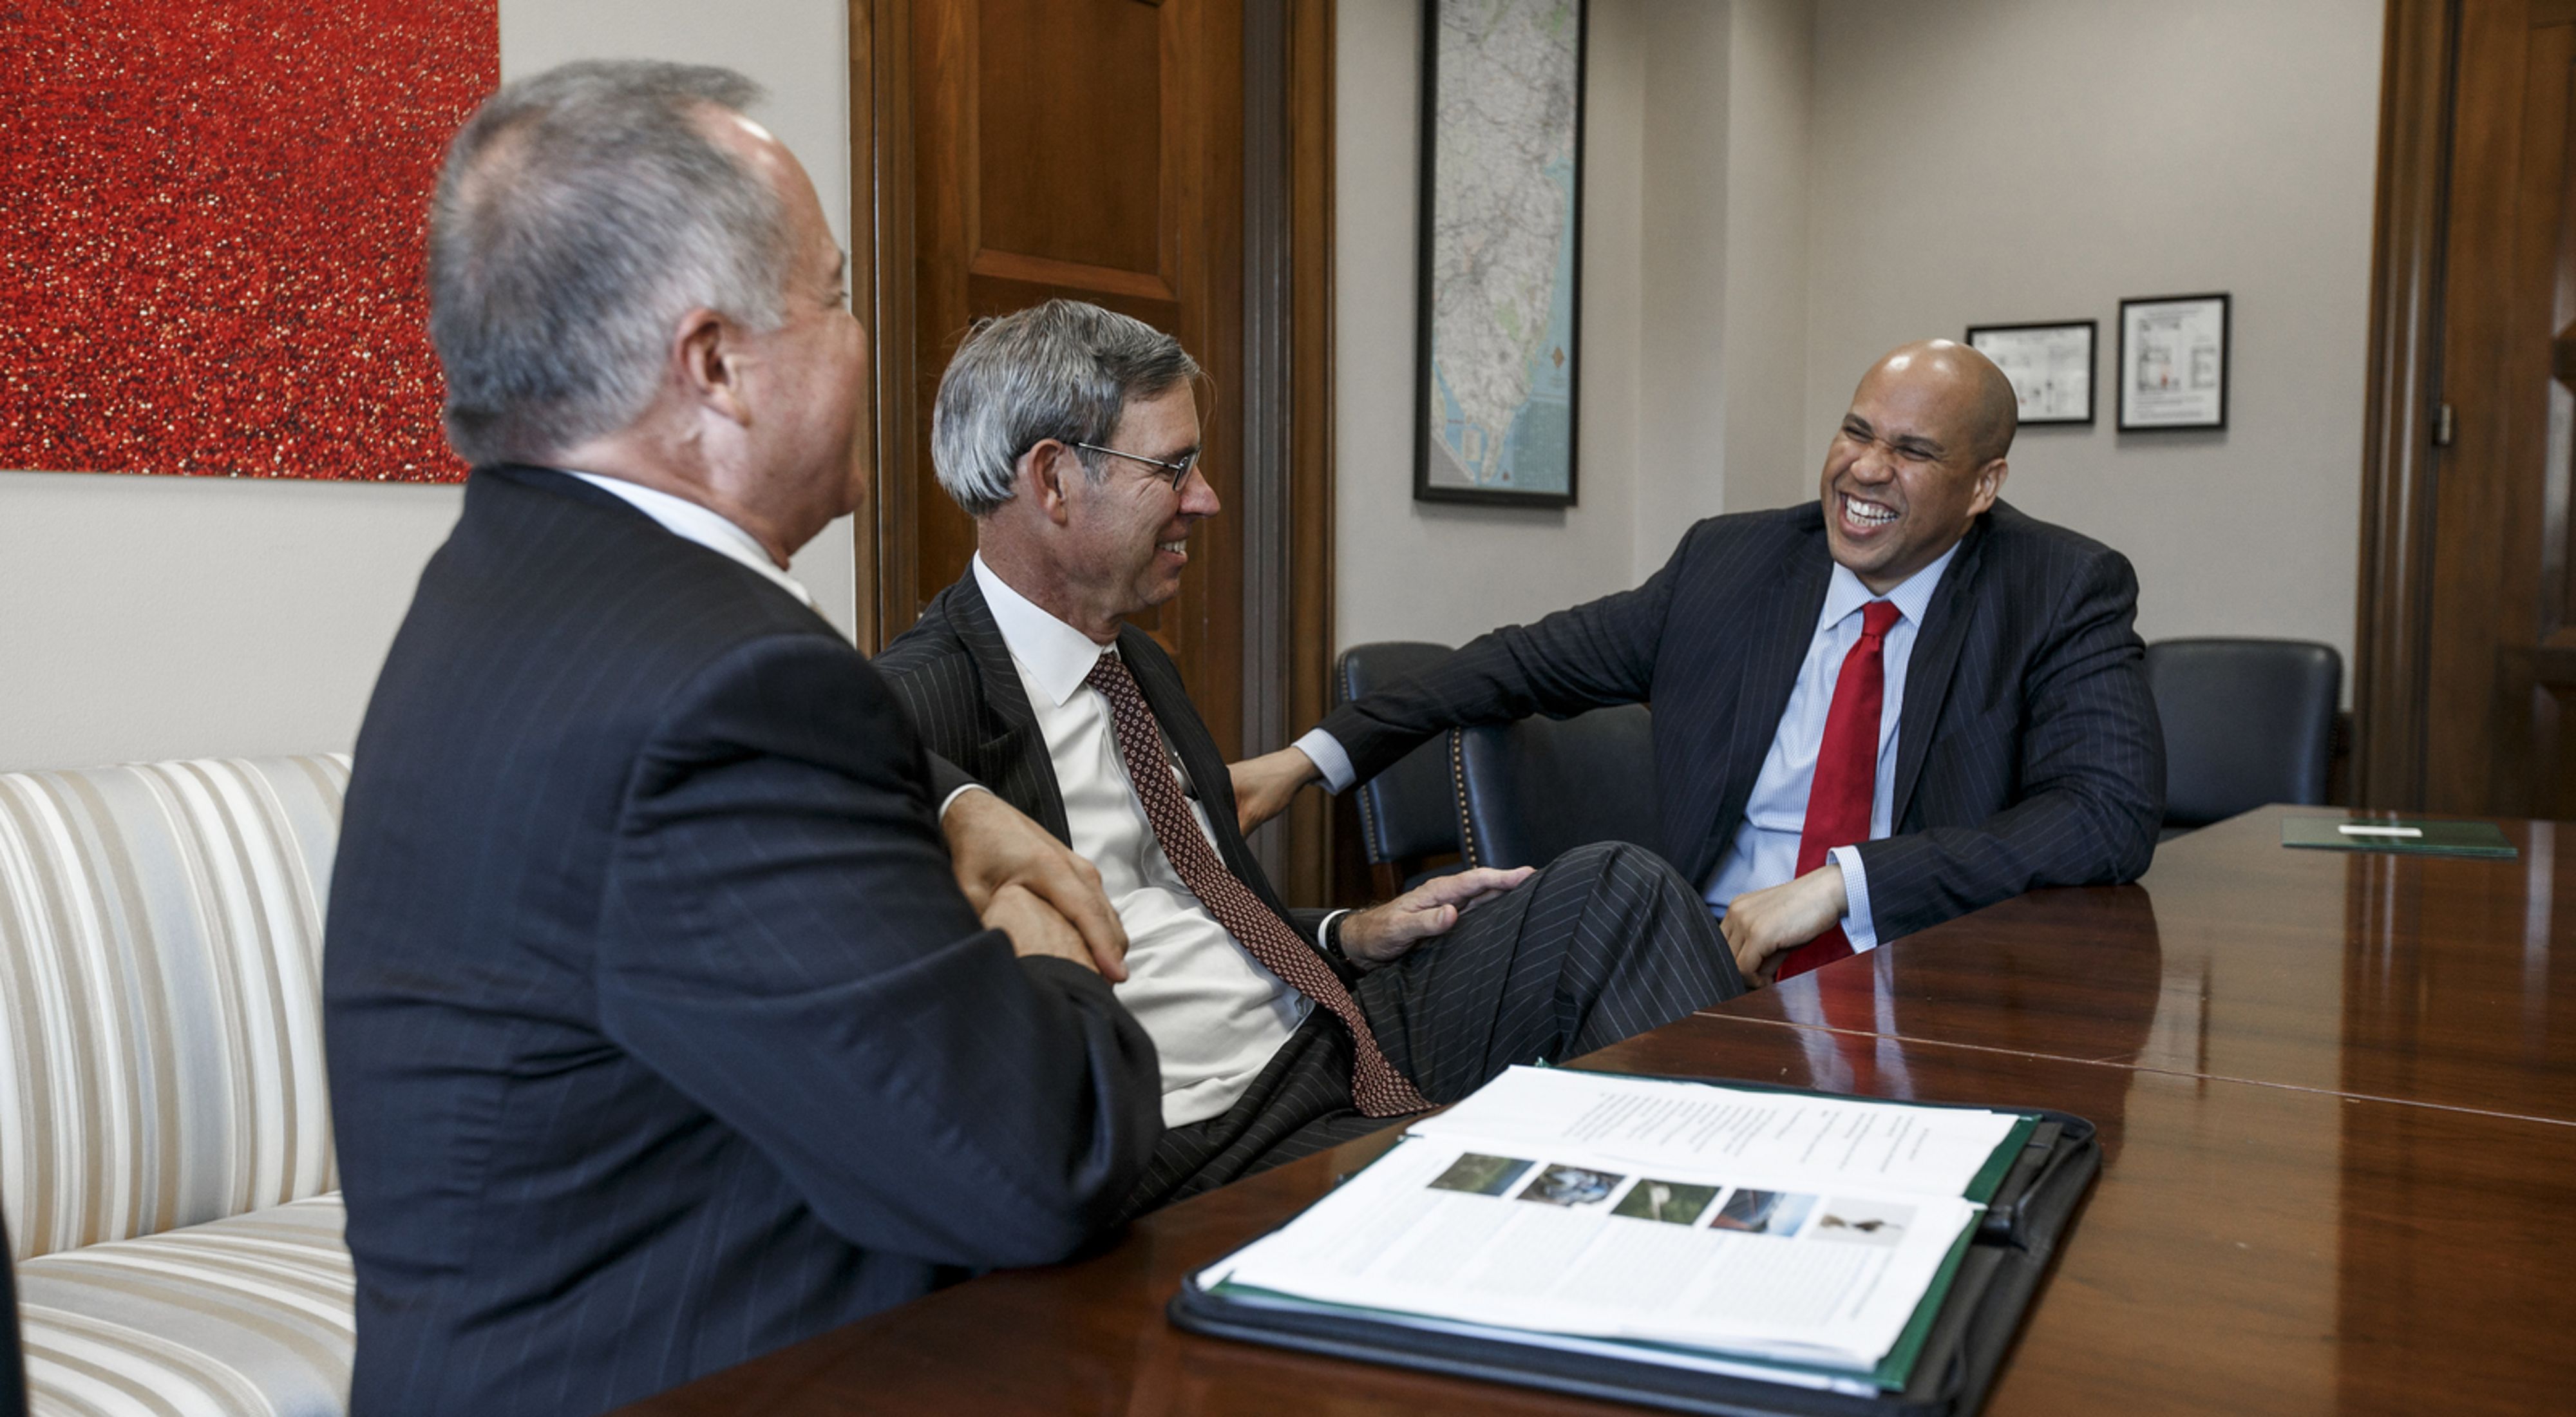 meets with representatives from TNC in his Capitol Hill office during Advocacy Day in 2015.